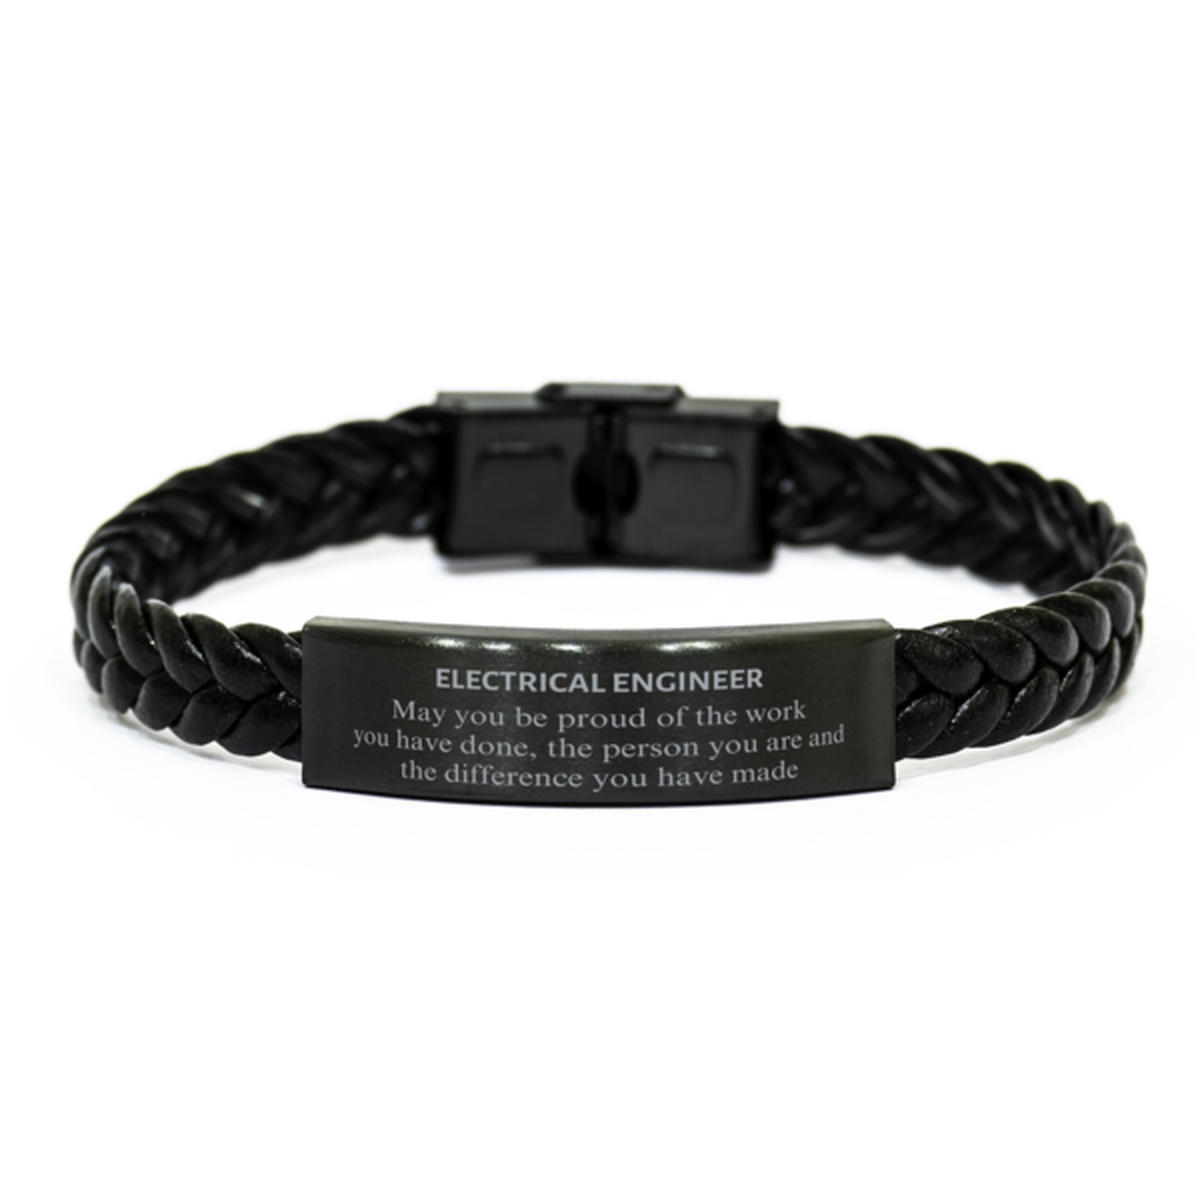 Electrical Engineer May you be proud of the work you have done, Retirement Electrical Engineer Braided Leather Bracelet for Colleague Appreciation Gifts Amazing for Electrical Engineer